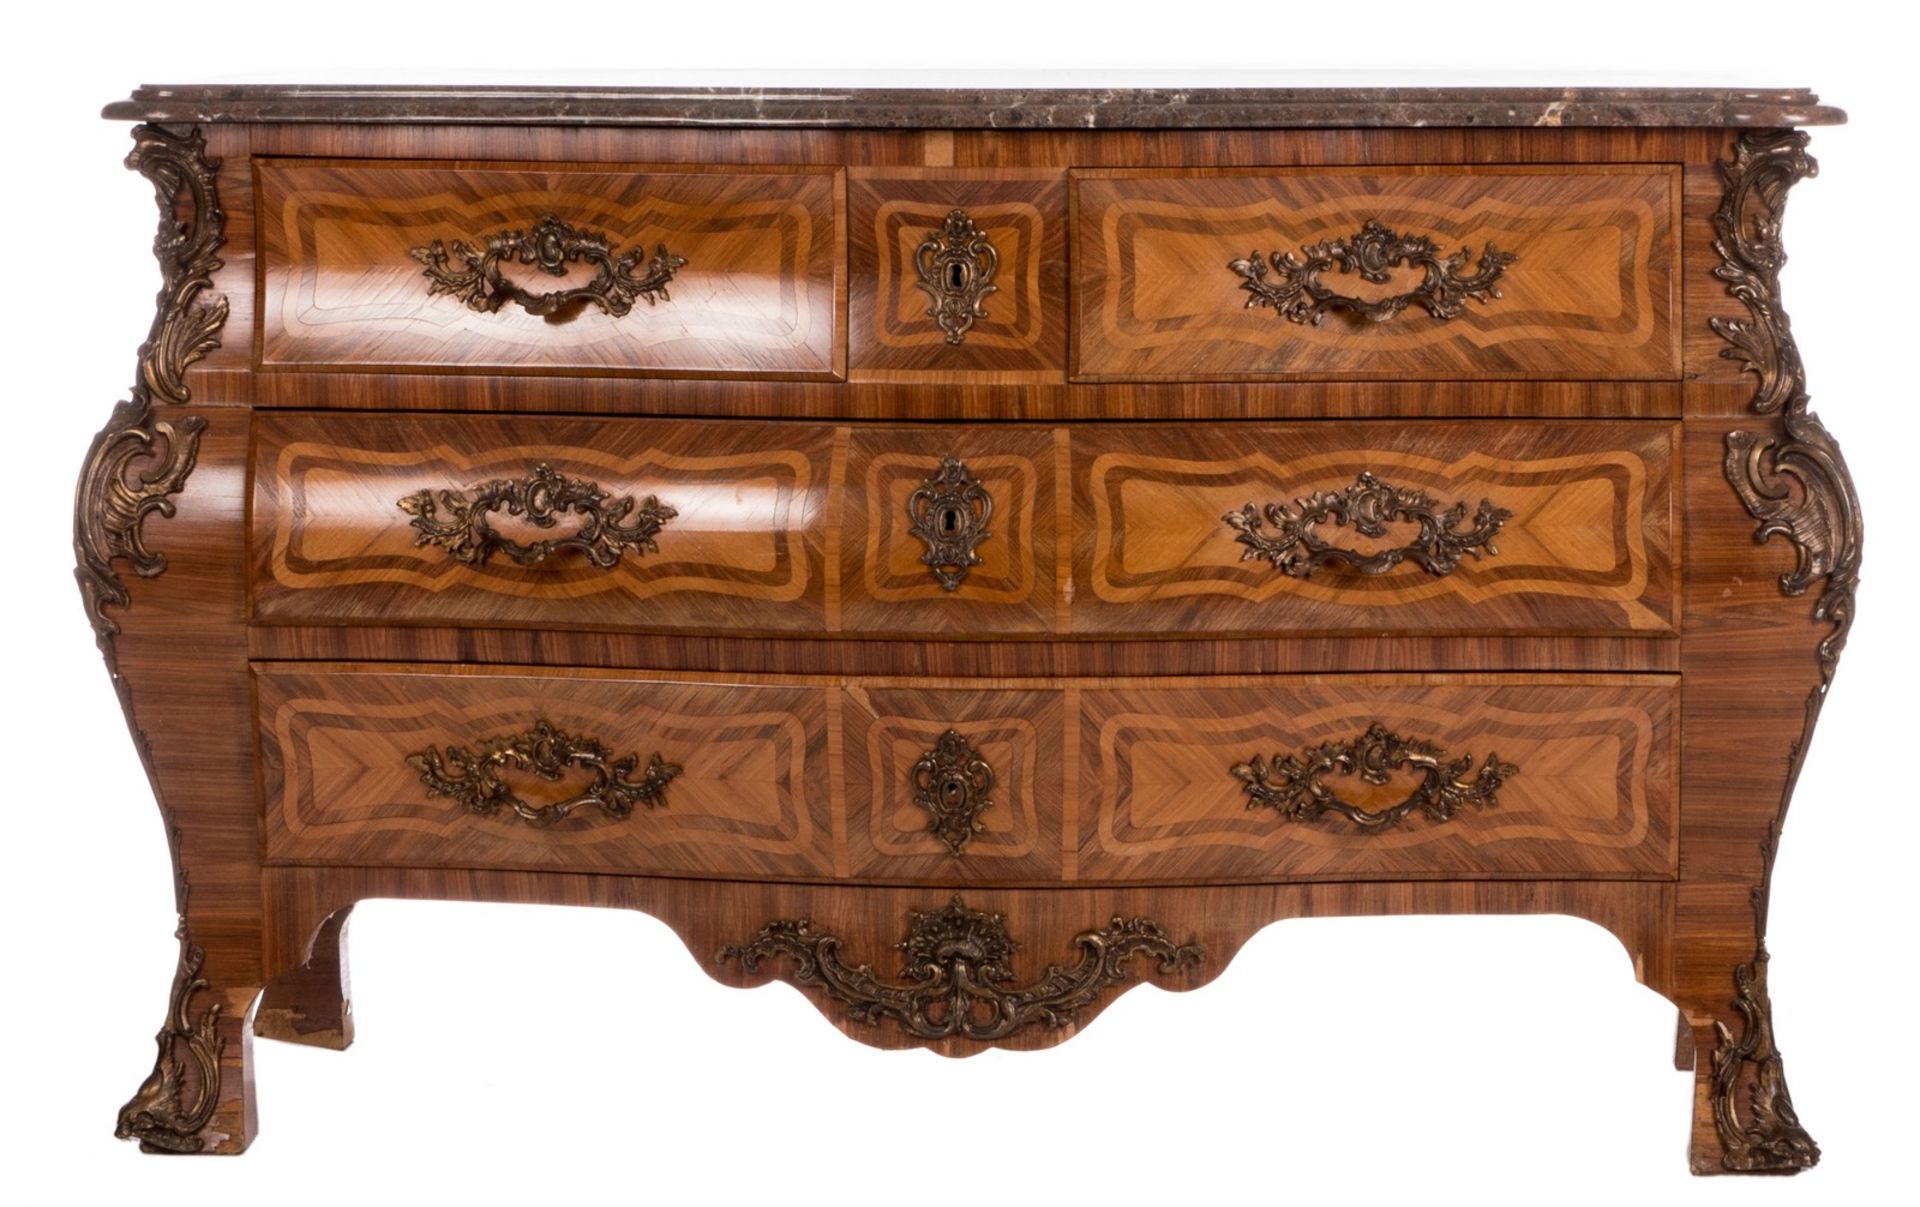 Commode à la régence, Rococo style, mahogany and rosewood veneer, bronze mounts and marble top, H 89